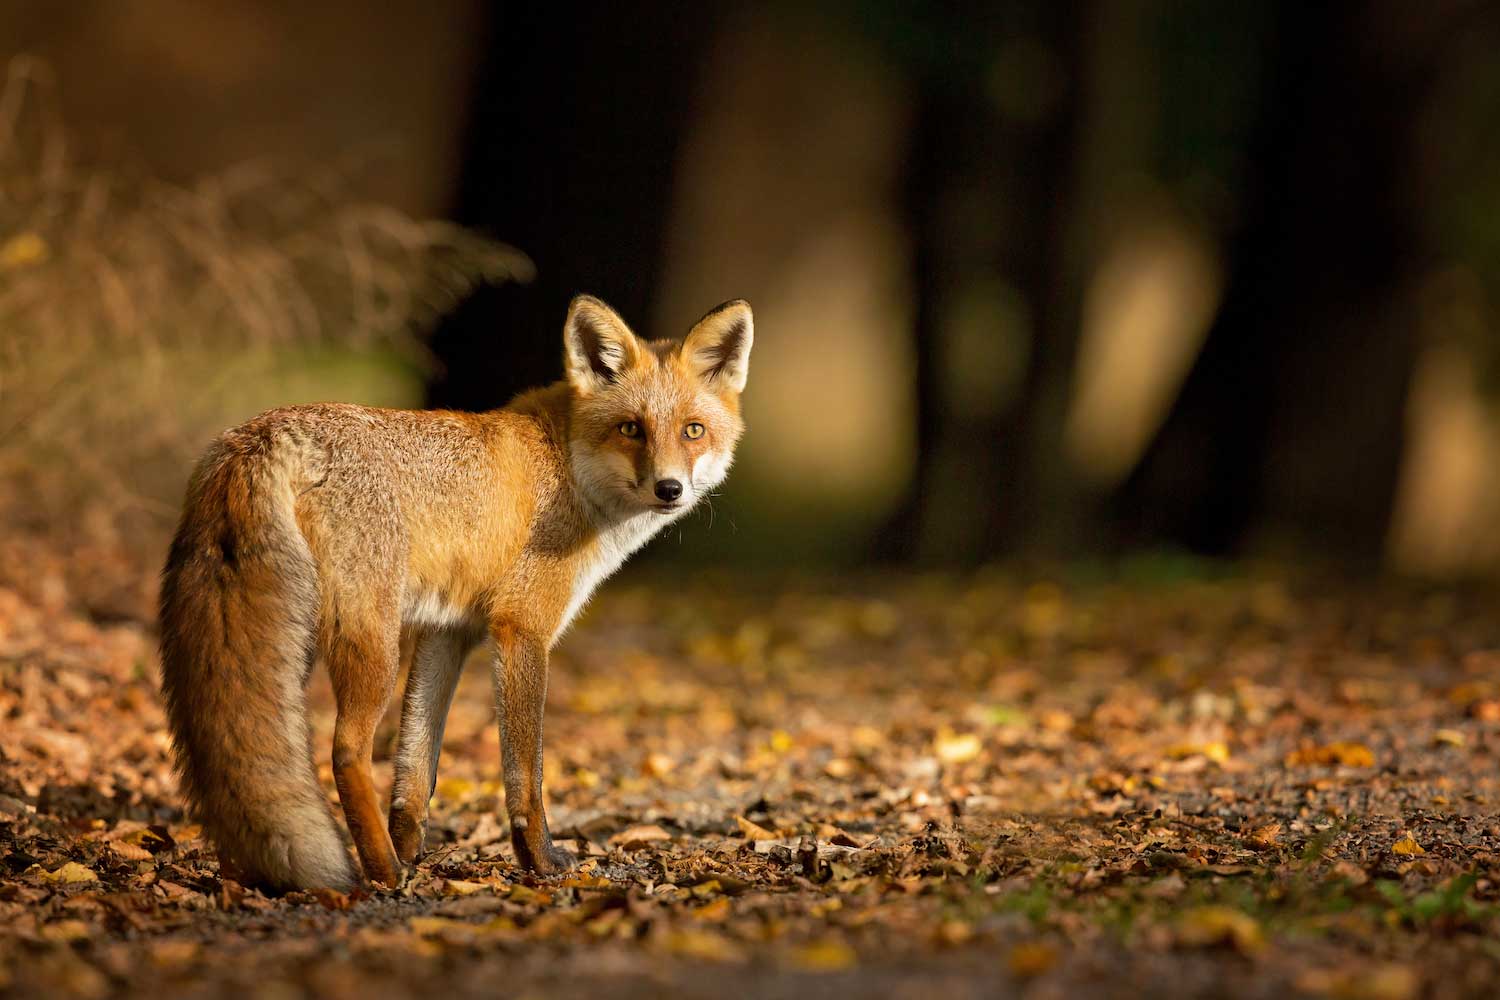 A red fox standing in a forest with the ground covered by fallen leaves.